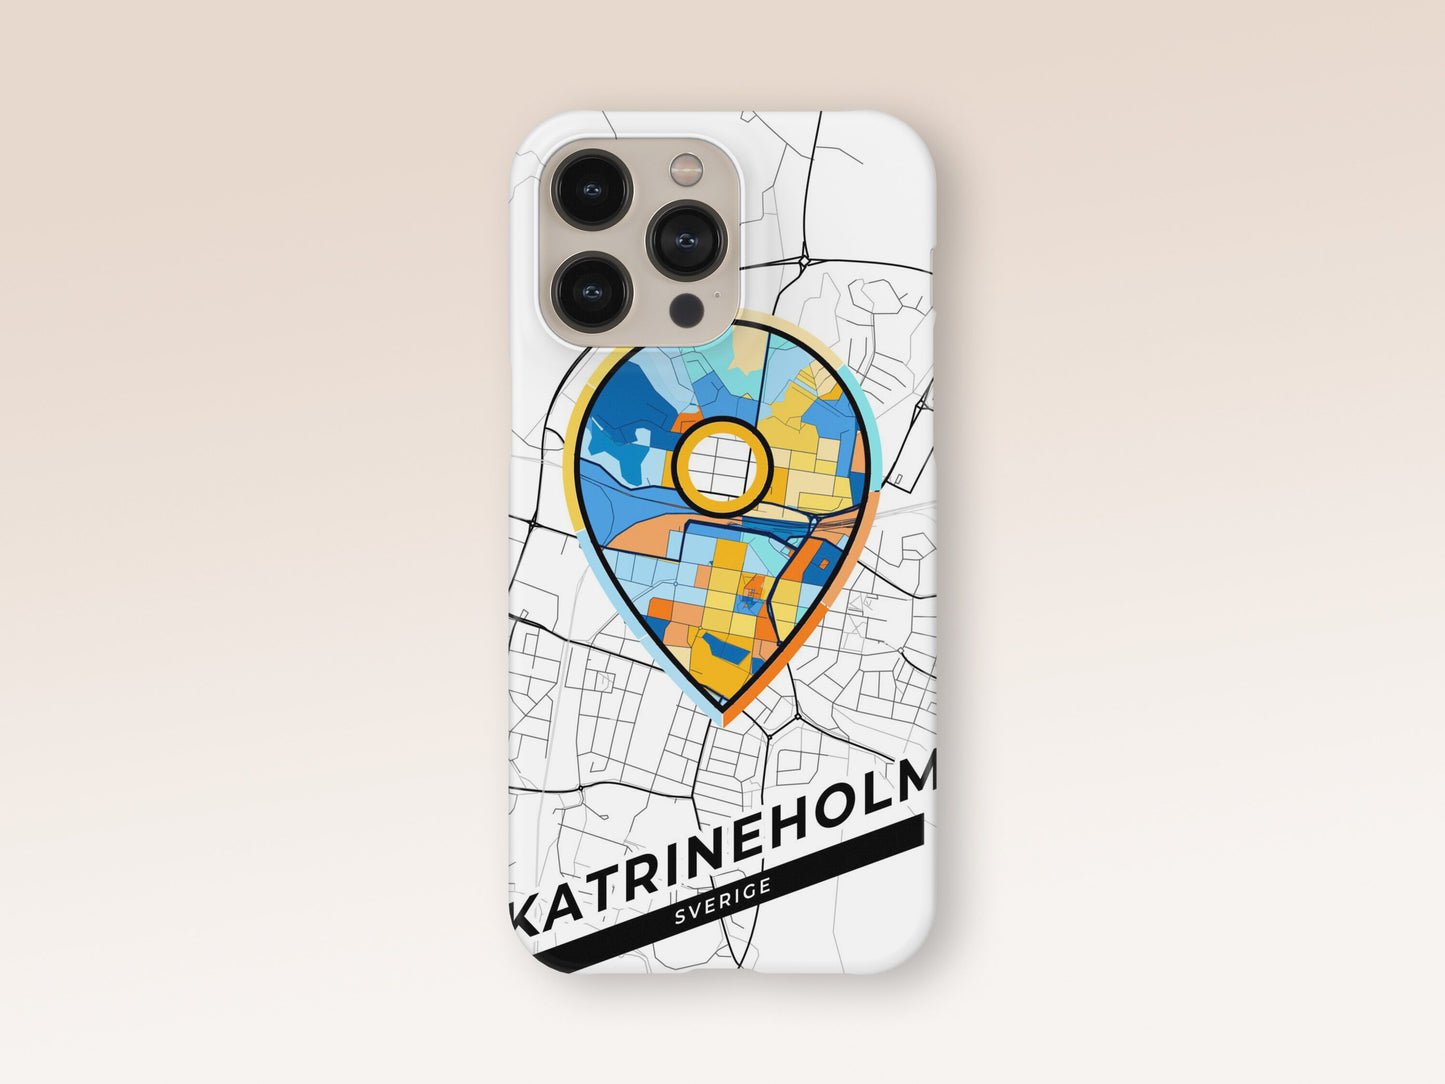 Katrineholm Sweden slim phone case with colorful icon. Birthday, wedding or housewarming gift. Couple match cases. 1